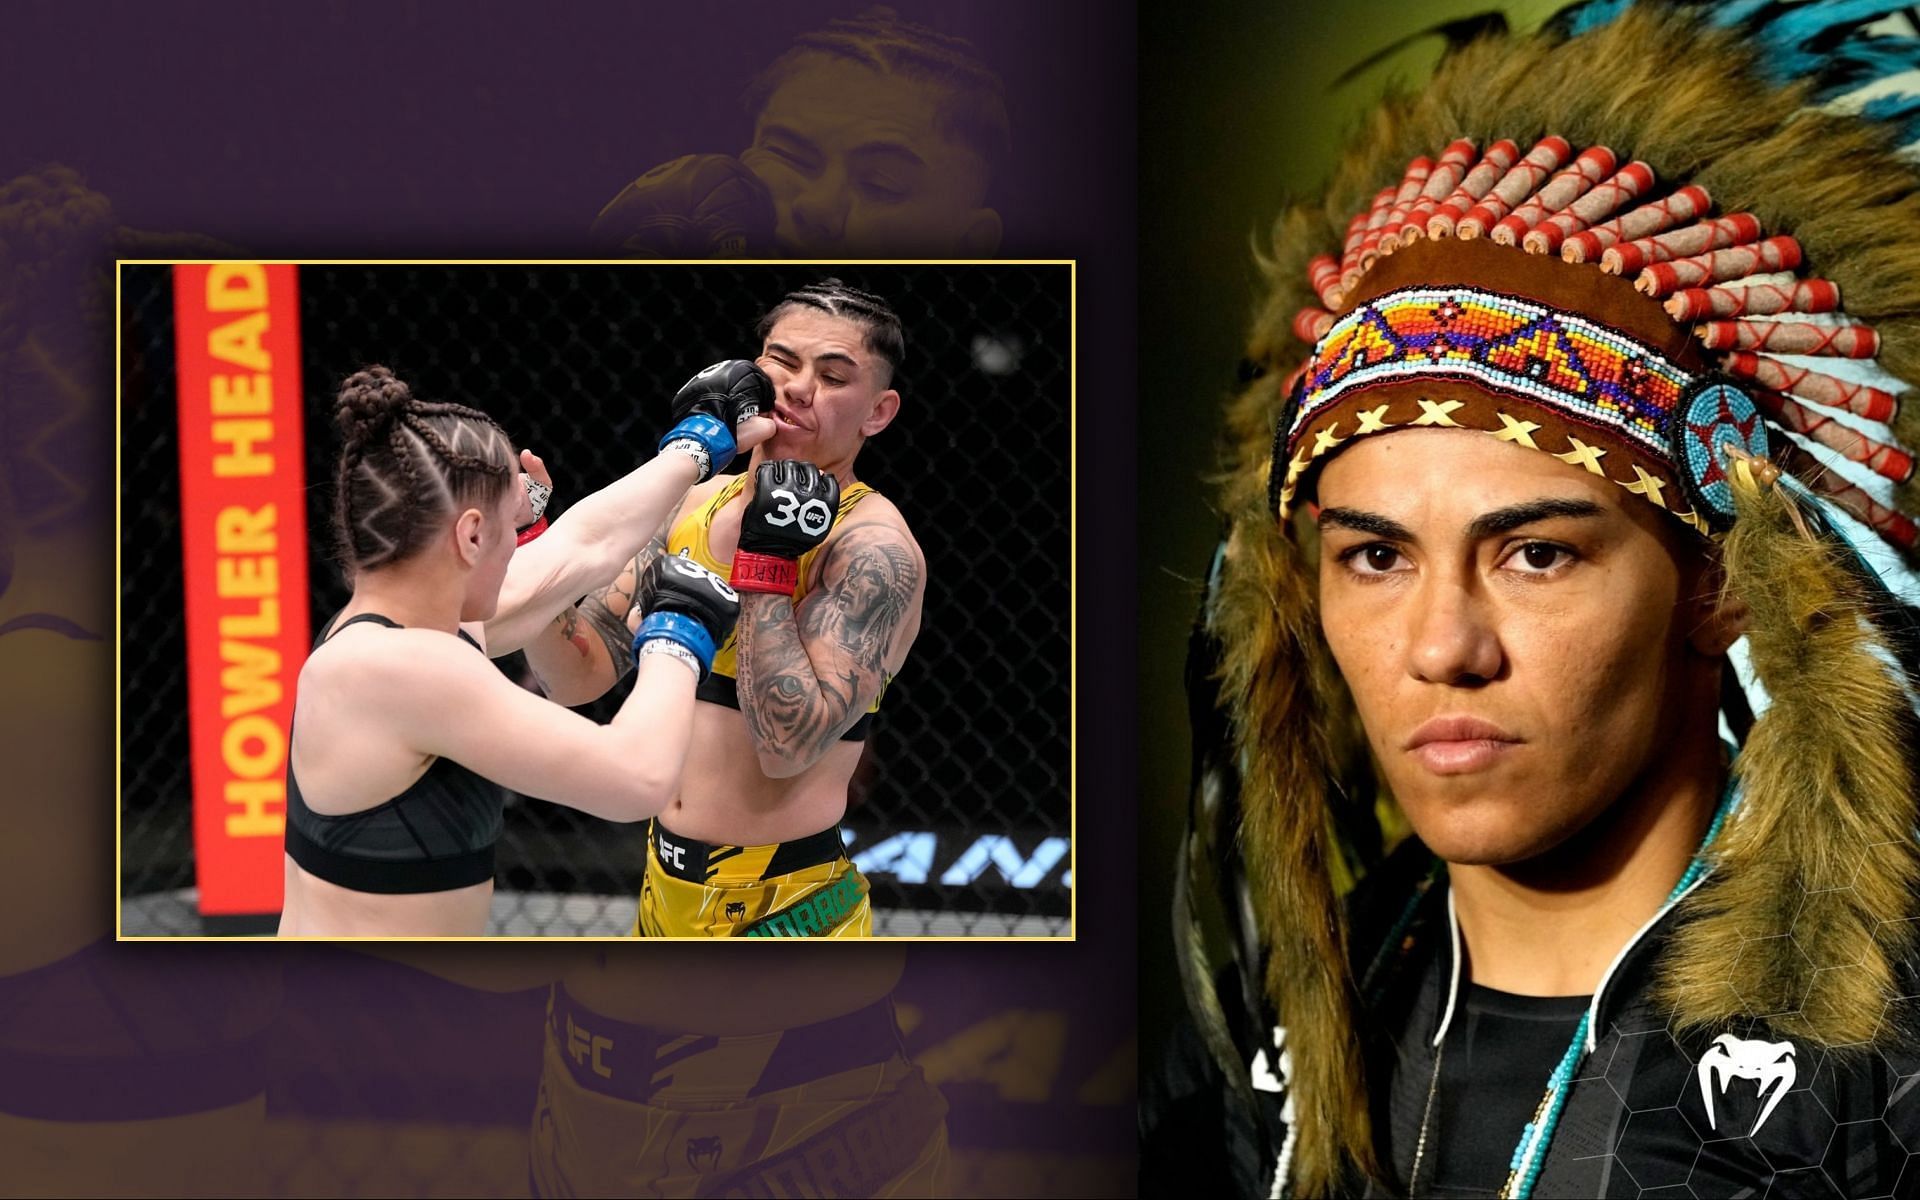 Jessica Andrade claims her breast slipping out caused her to lose focus in Erin Blanchfield